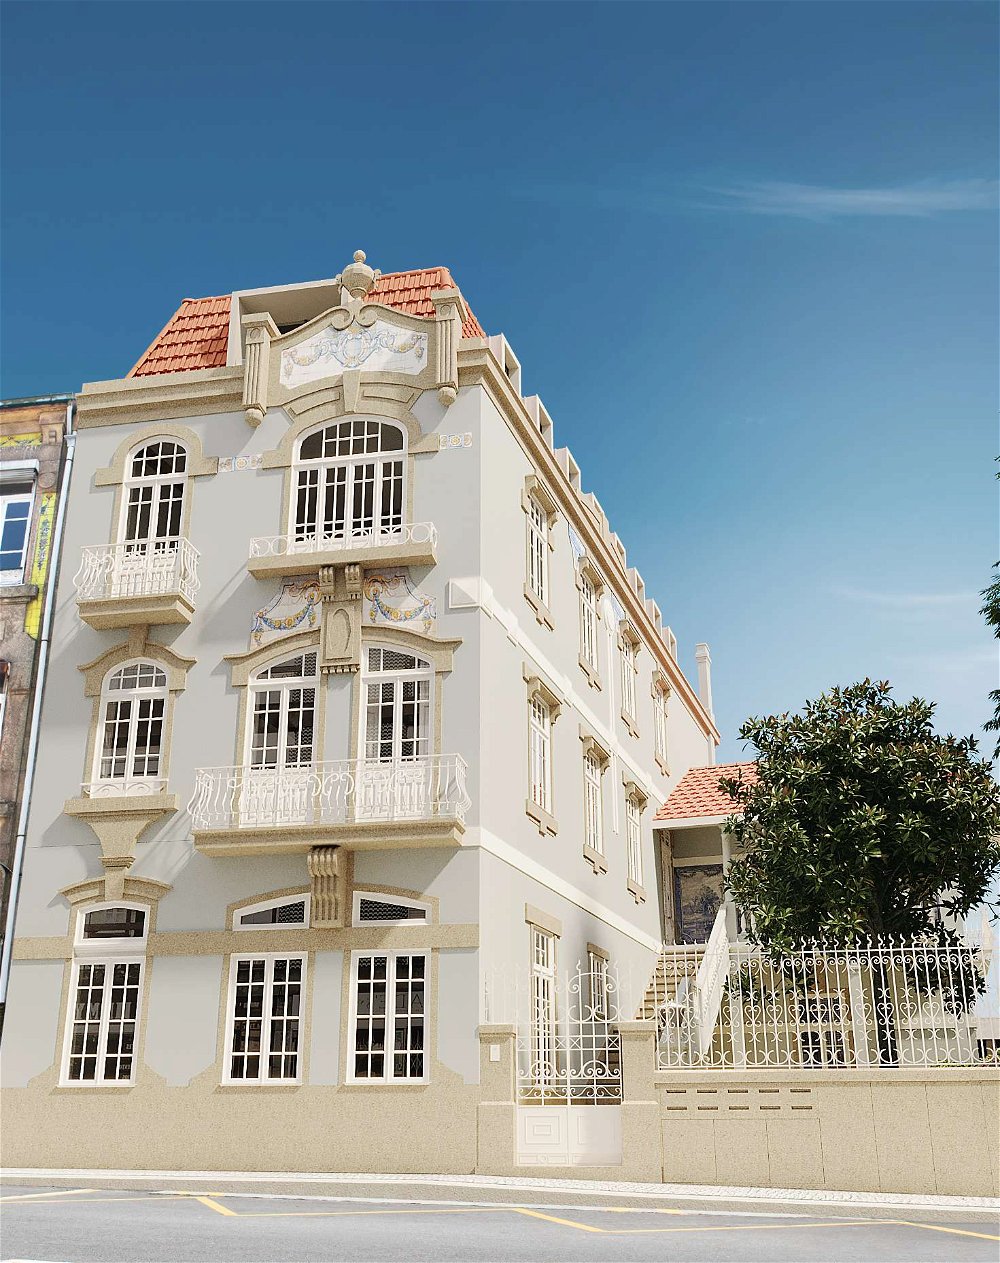 3 bedroom apartment duplex with balcony and parking in Porto 2287741776